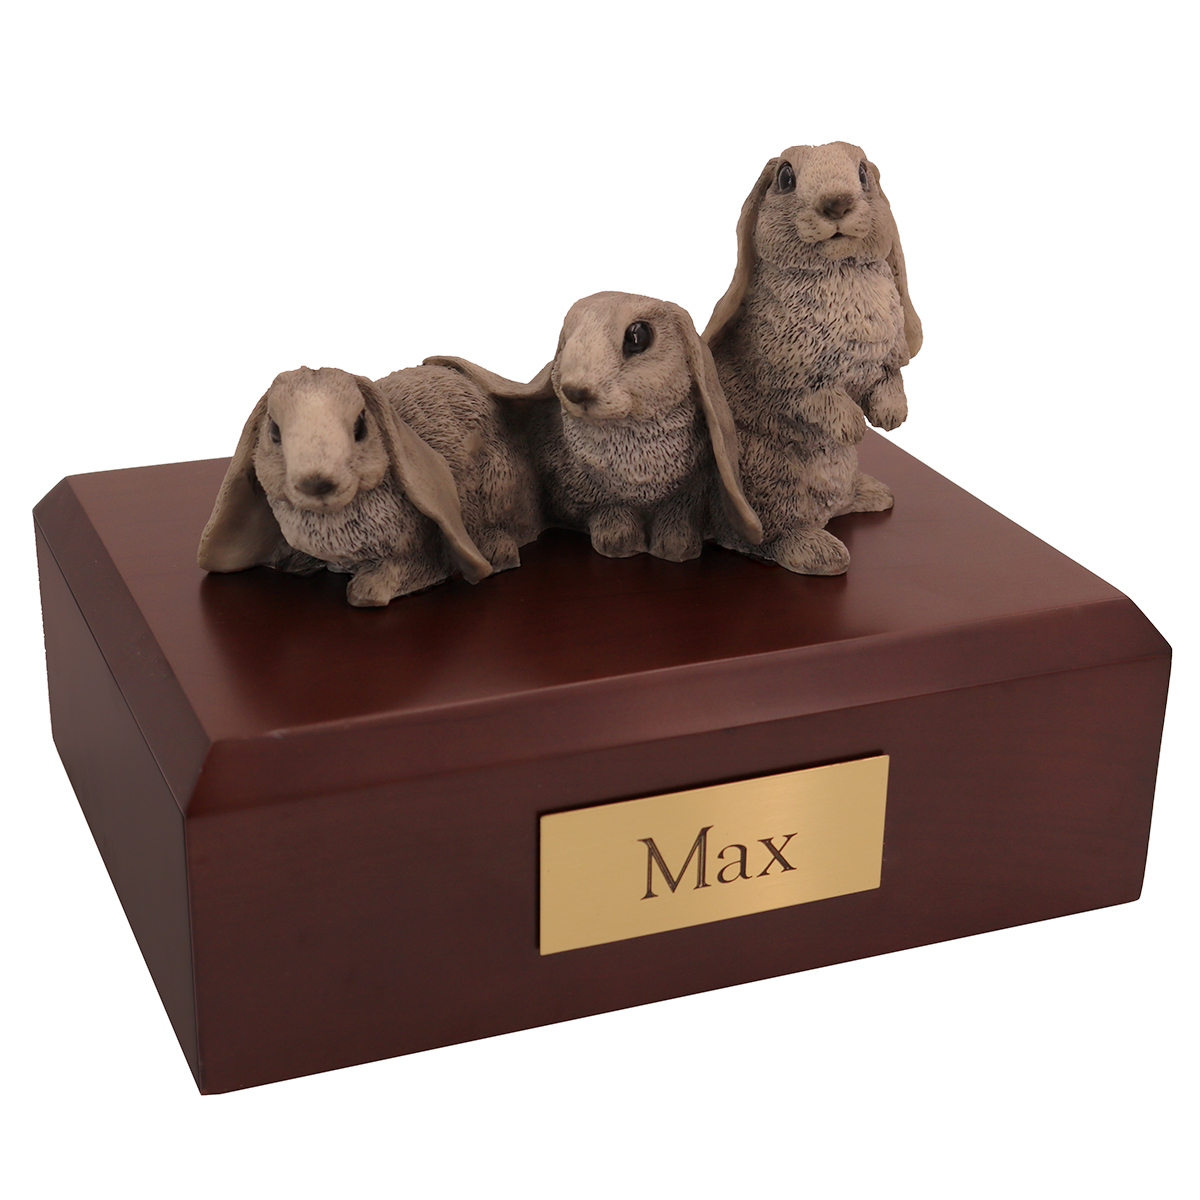 3 Gray Rabbits Side by Side - Figurine Urn